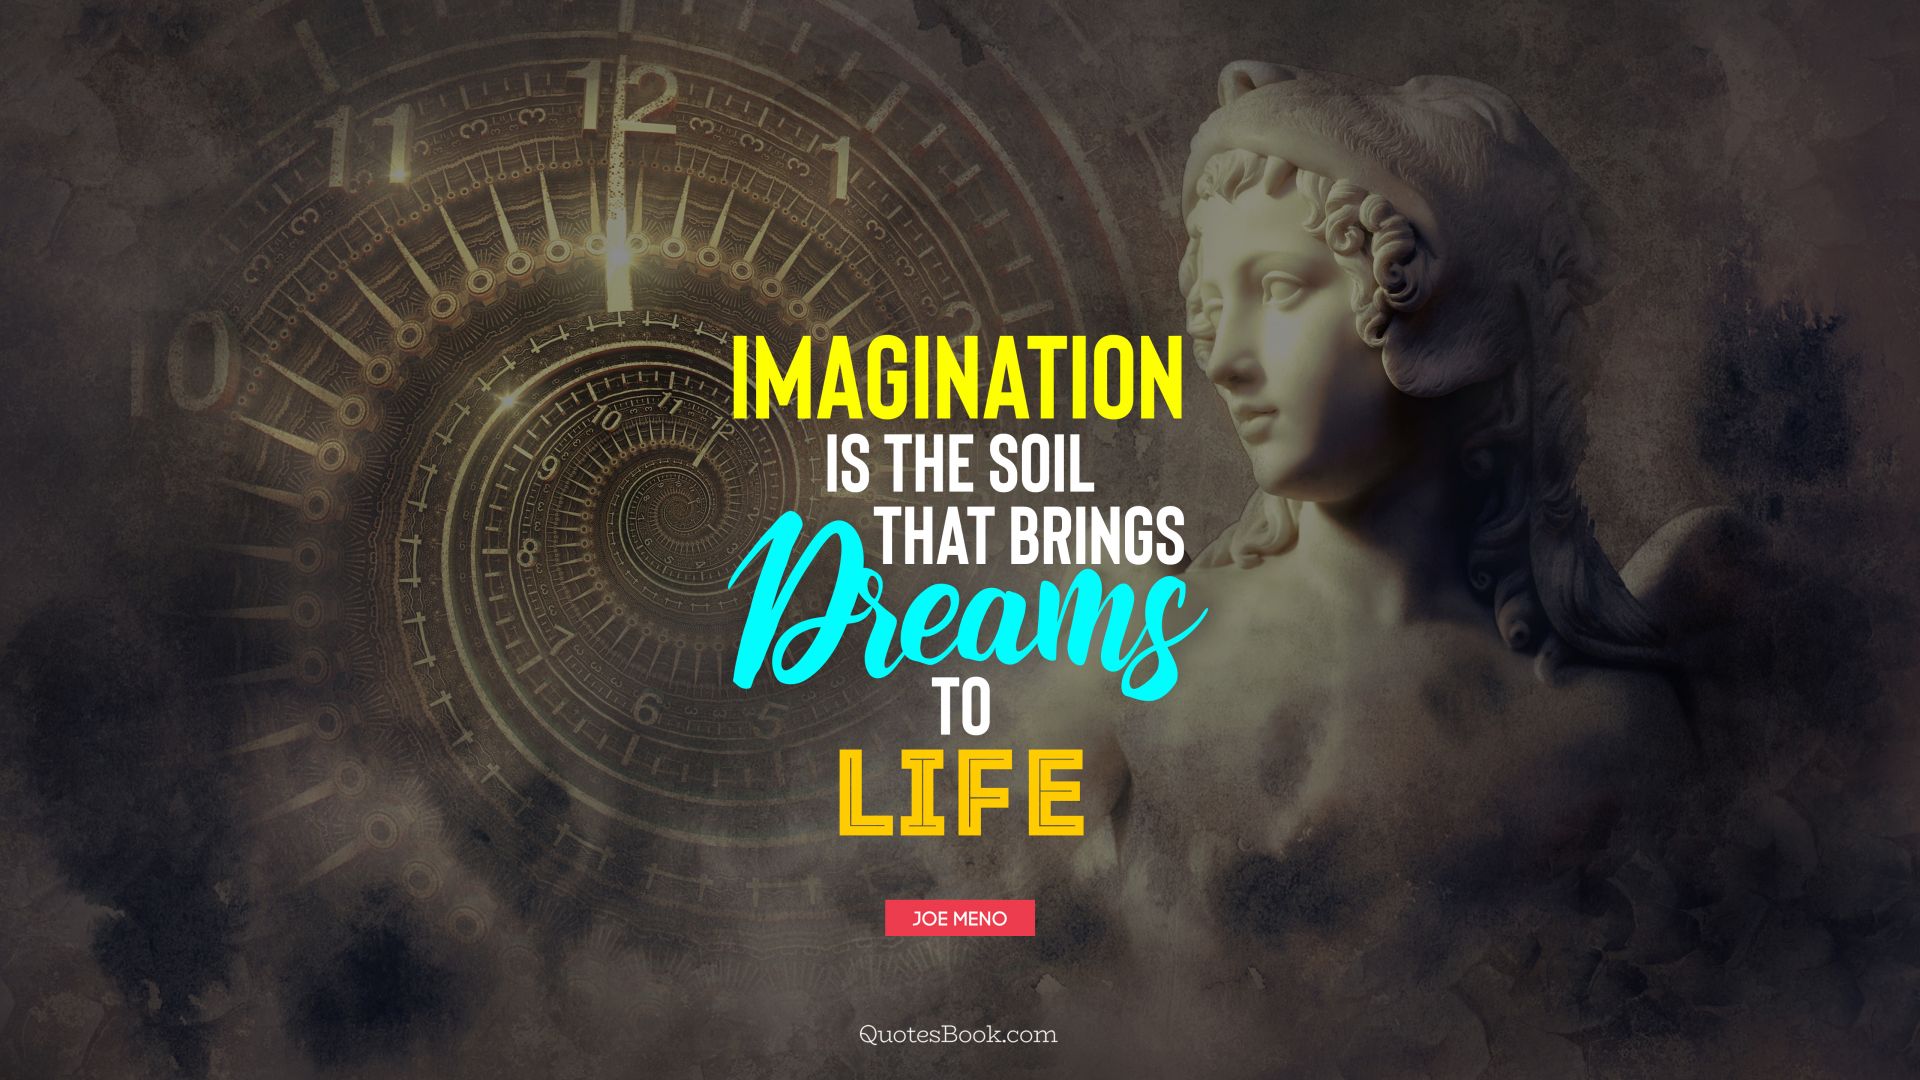 Imagination is the soil that brings dreams to life. - Quote by Joe Meno